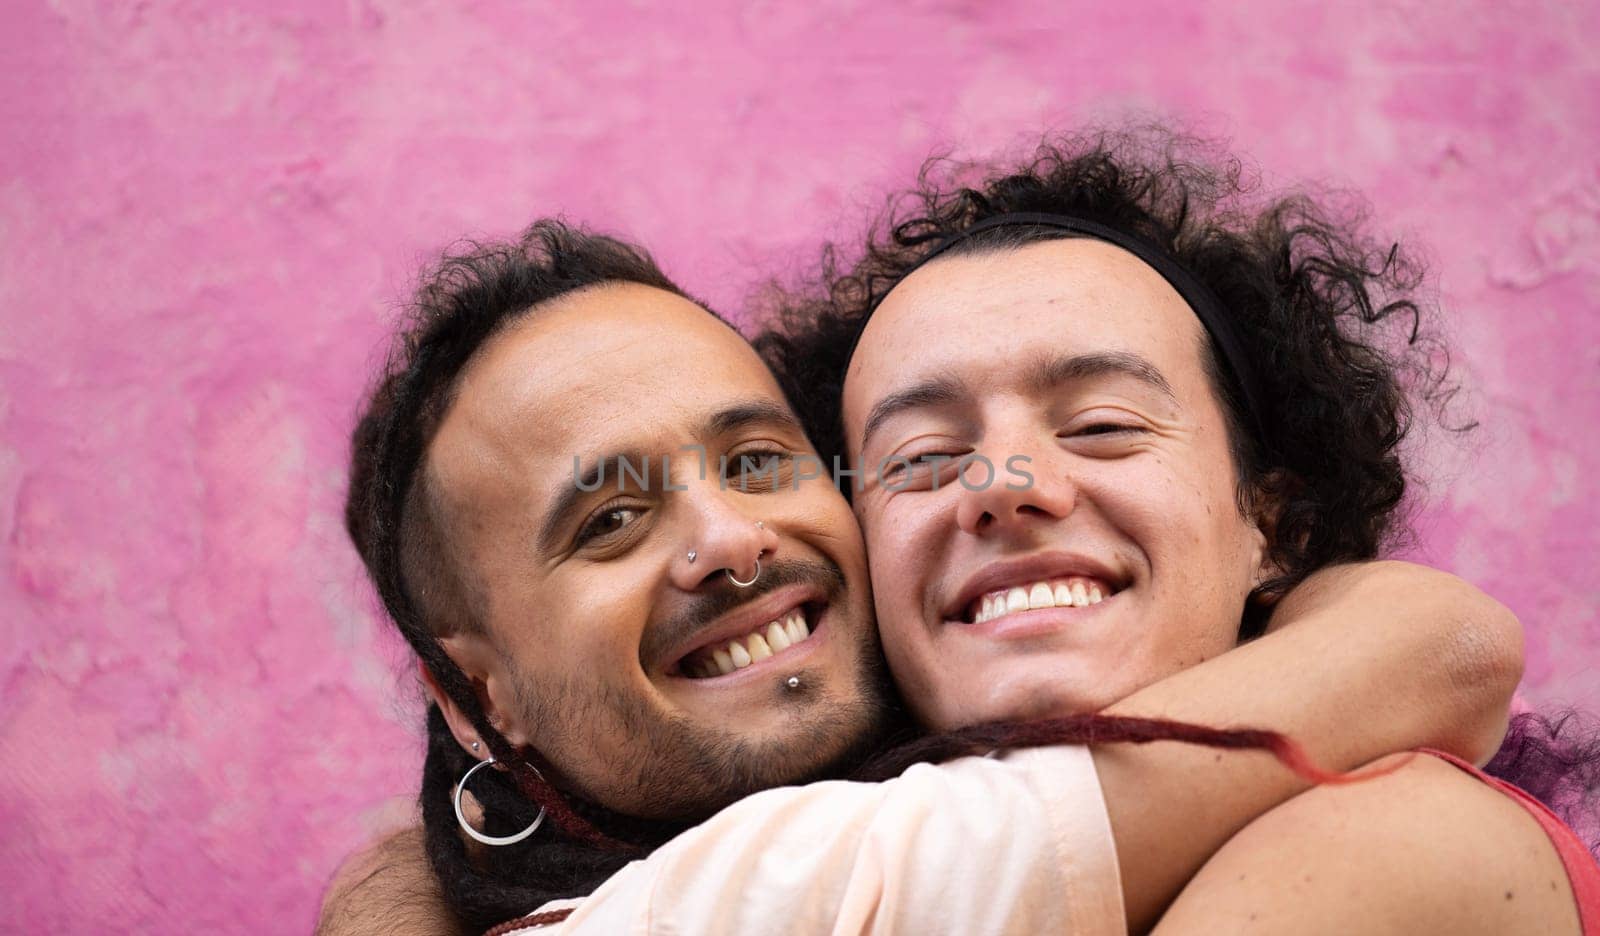 Close up headshot of two gay men lovers hug each other with smiles on their faces isolated on pink background by papatonic